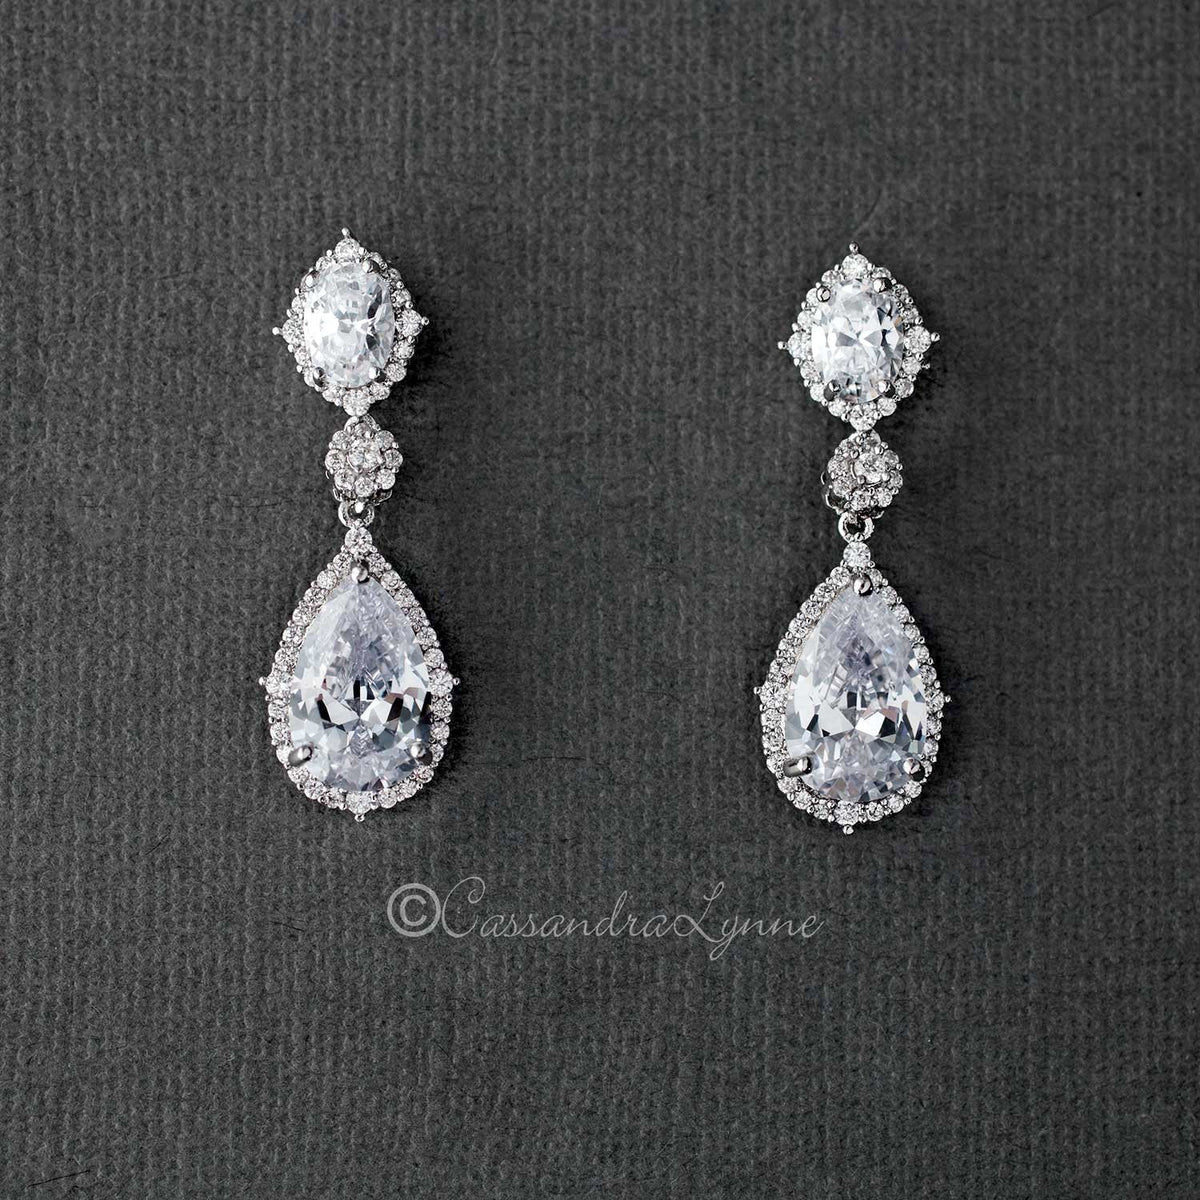 Oval and Water Drop Cubic Zirconia Earrings